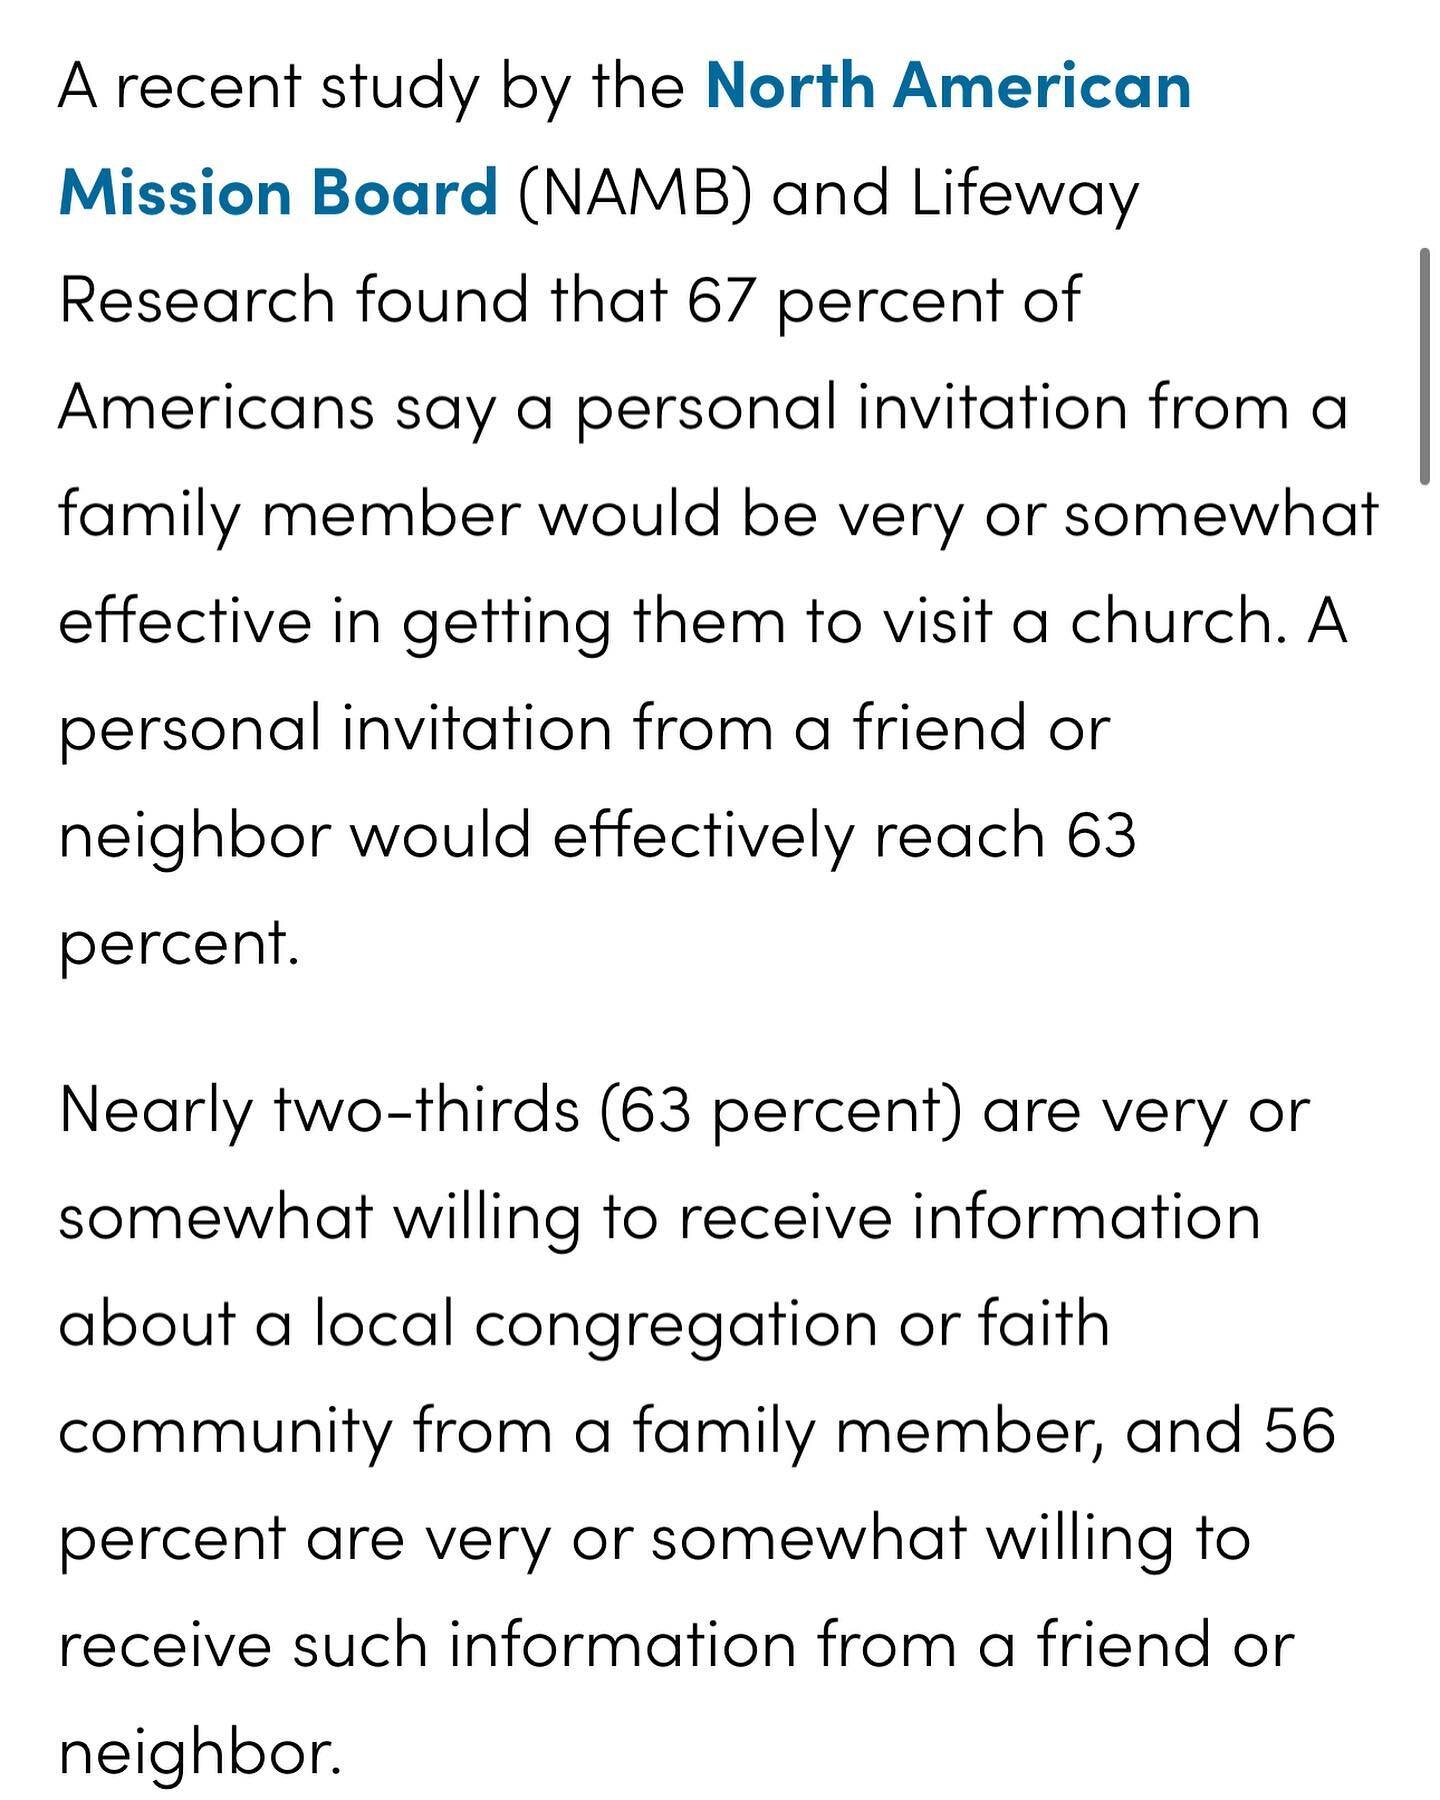 Did you know that a majority of people would respond positively to an invitation from a friend or family member to attend church? In fact, a personal invitation is by and far the most effective means of getting someone to attend a church service. Add